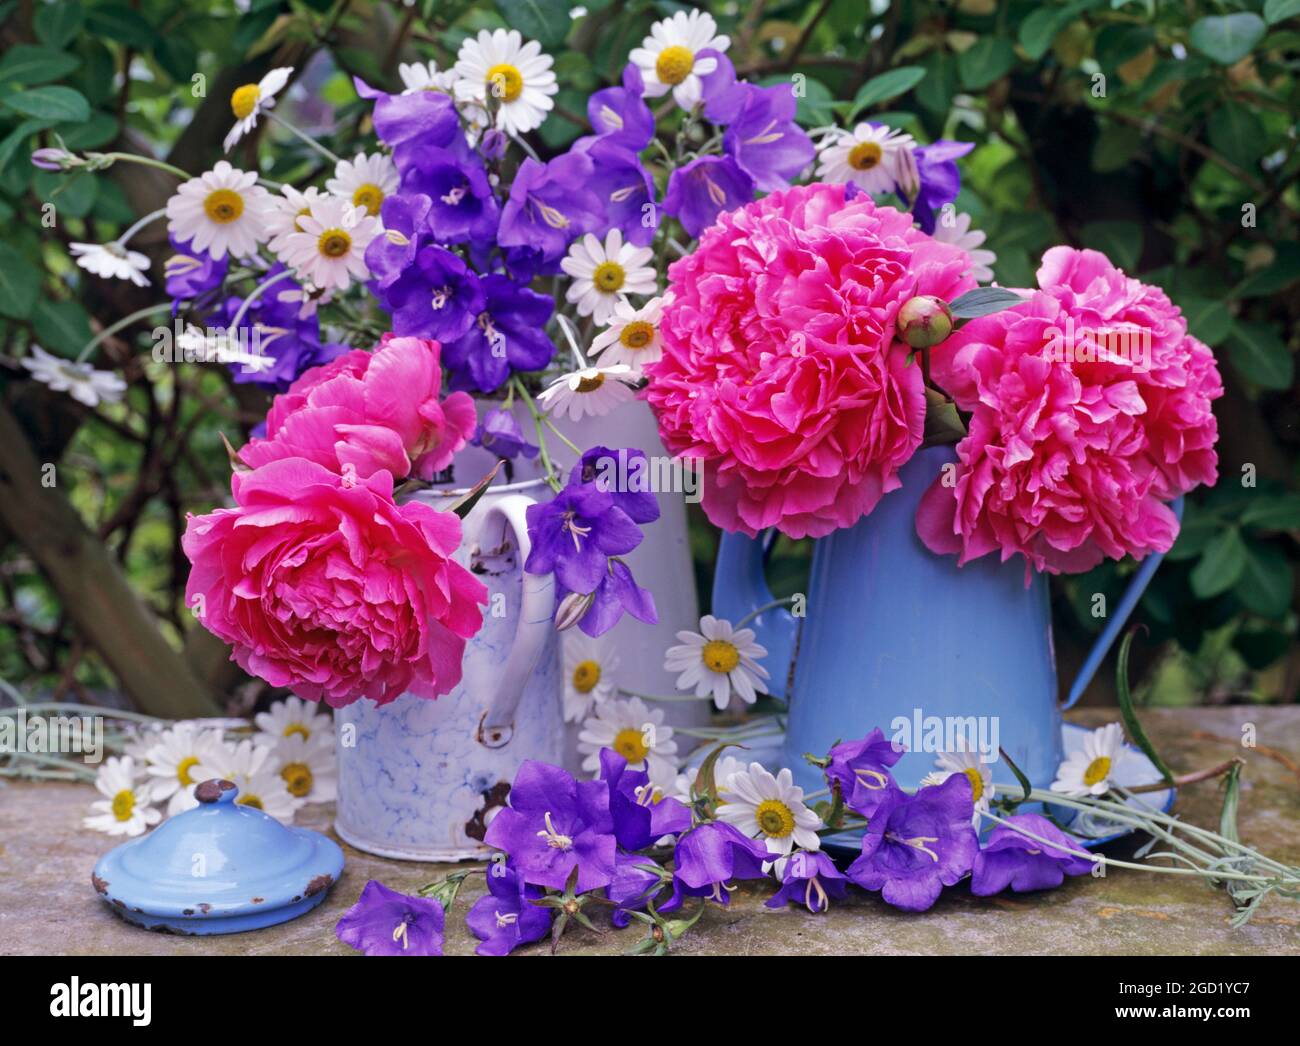 botany, peonia, chrysanthemum daisy, campanula platycodon grandiflorus in metal jugs outdoors, ADDITIONAL-RIGHTS-CLEARANCE-INFO-NOT-AVAILABLE Stock Photo